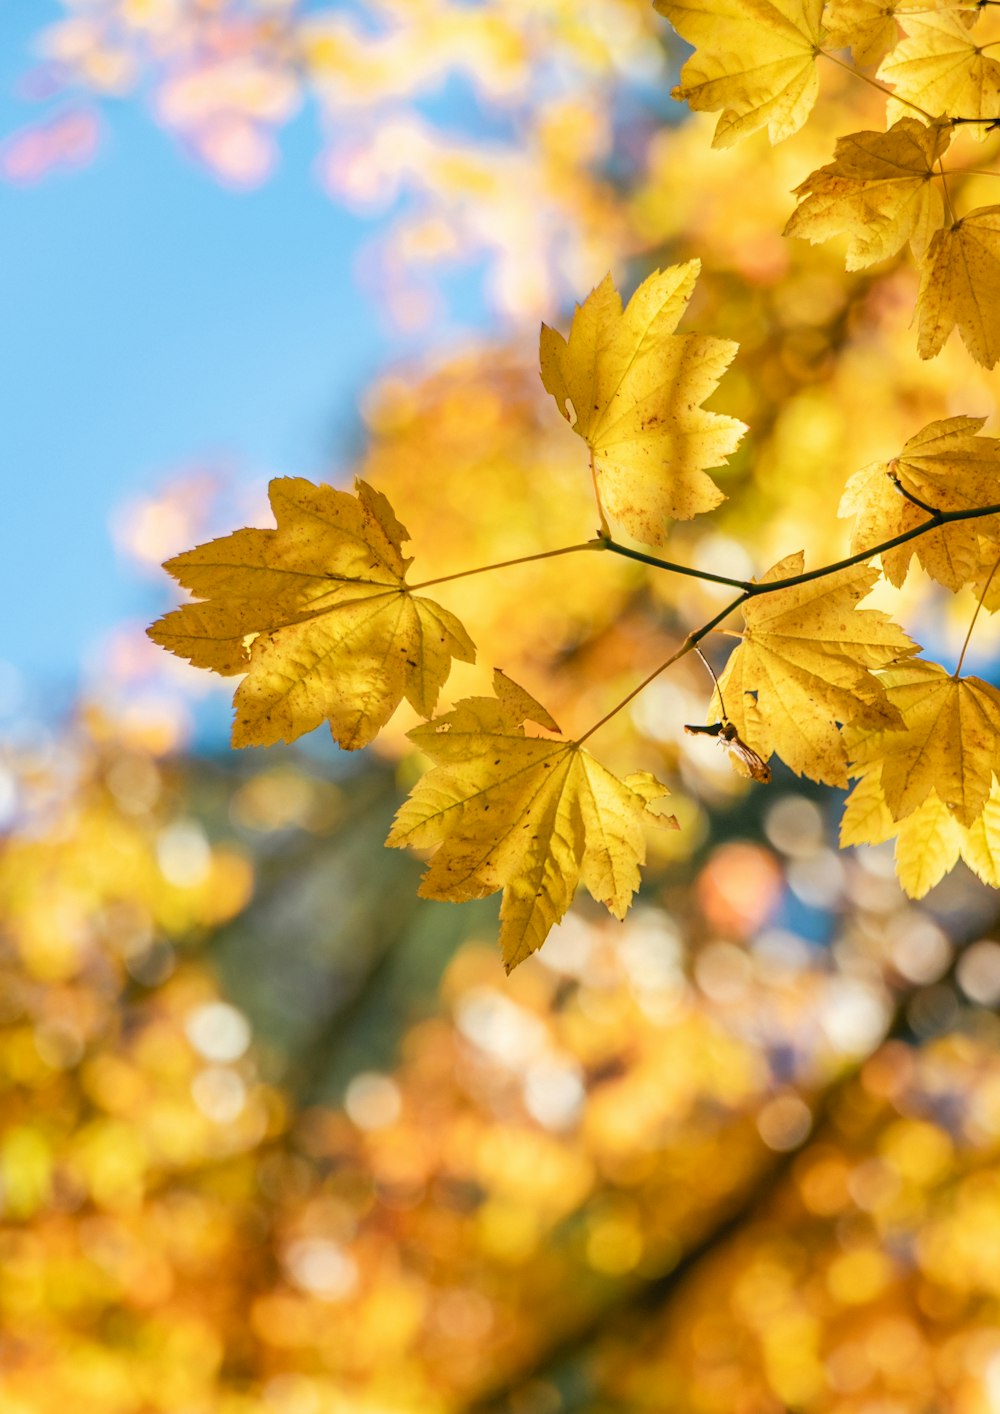 a close up of yellow leaves on a tree branch